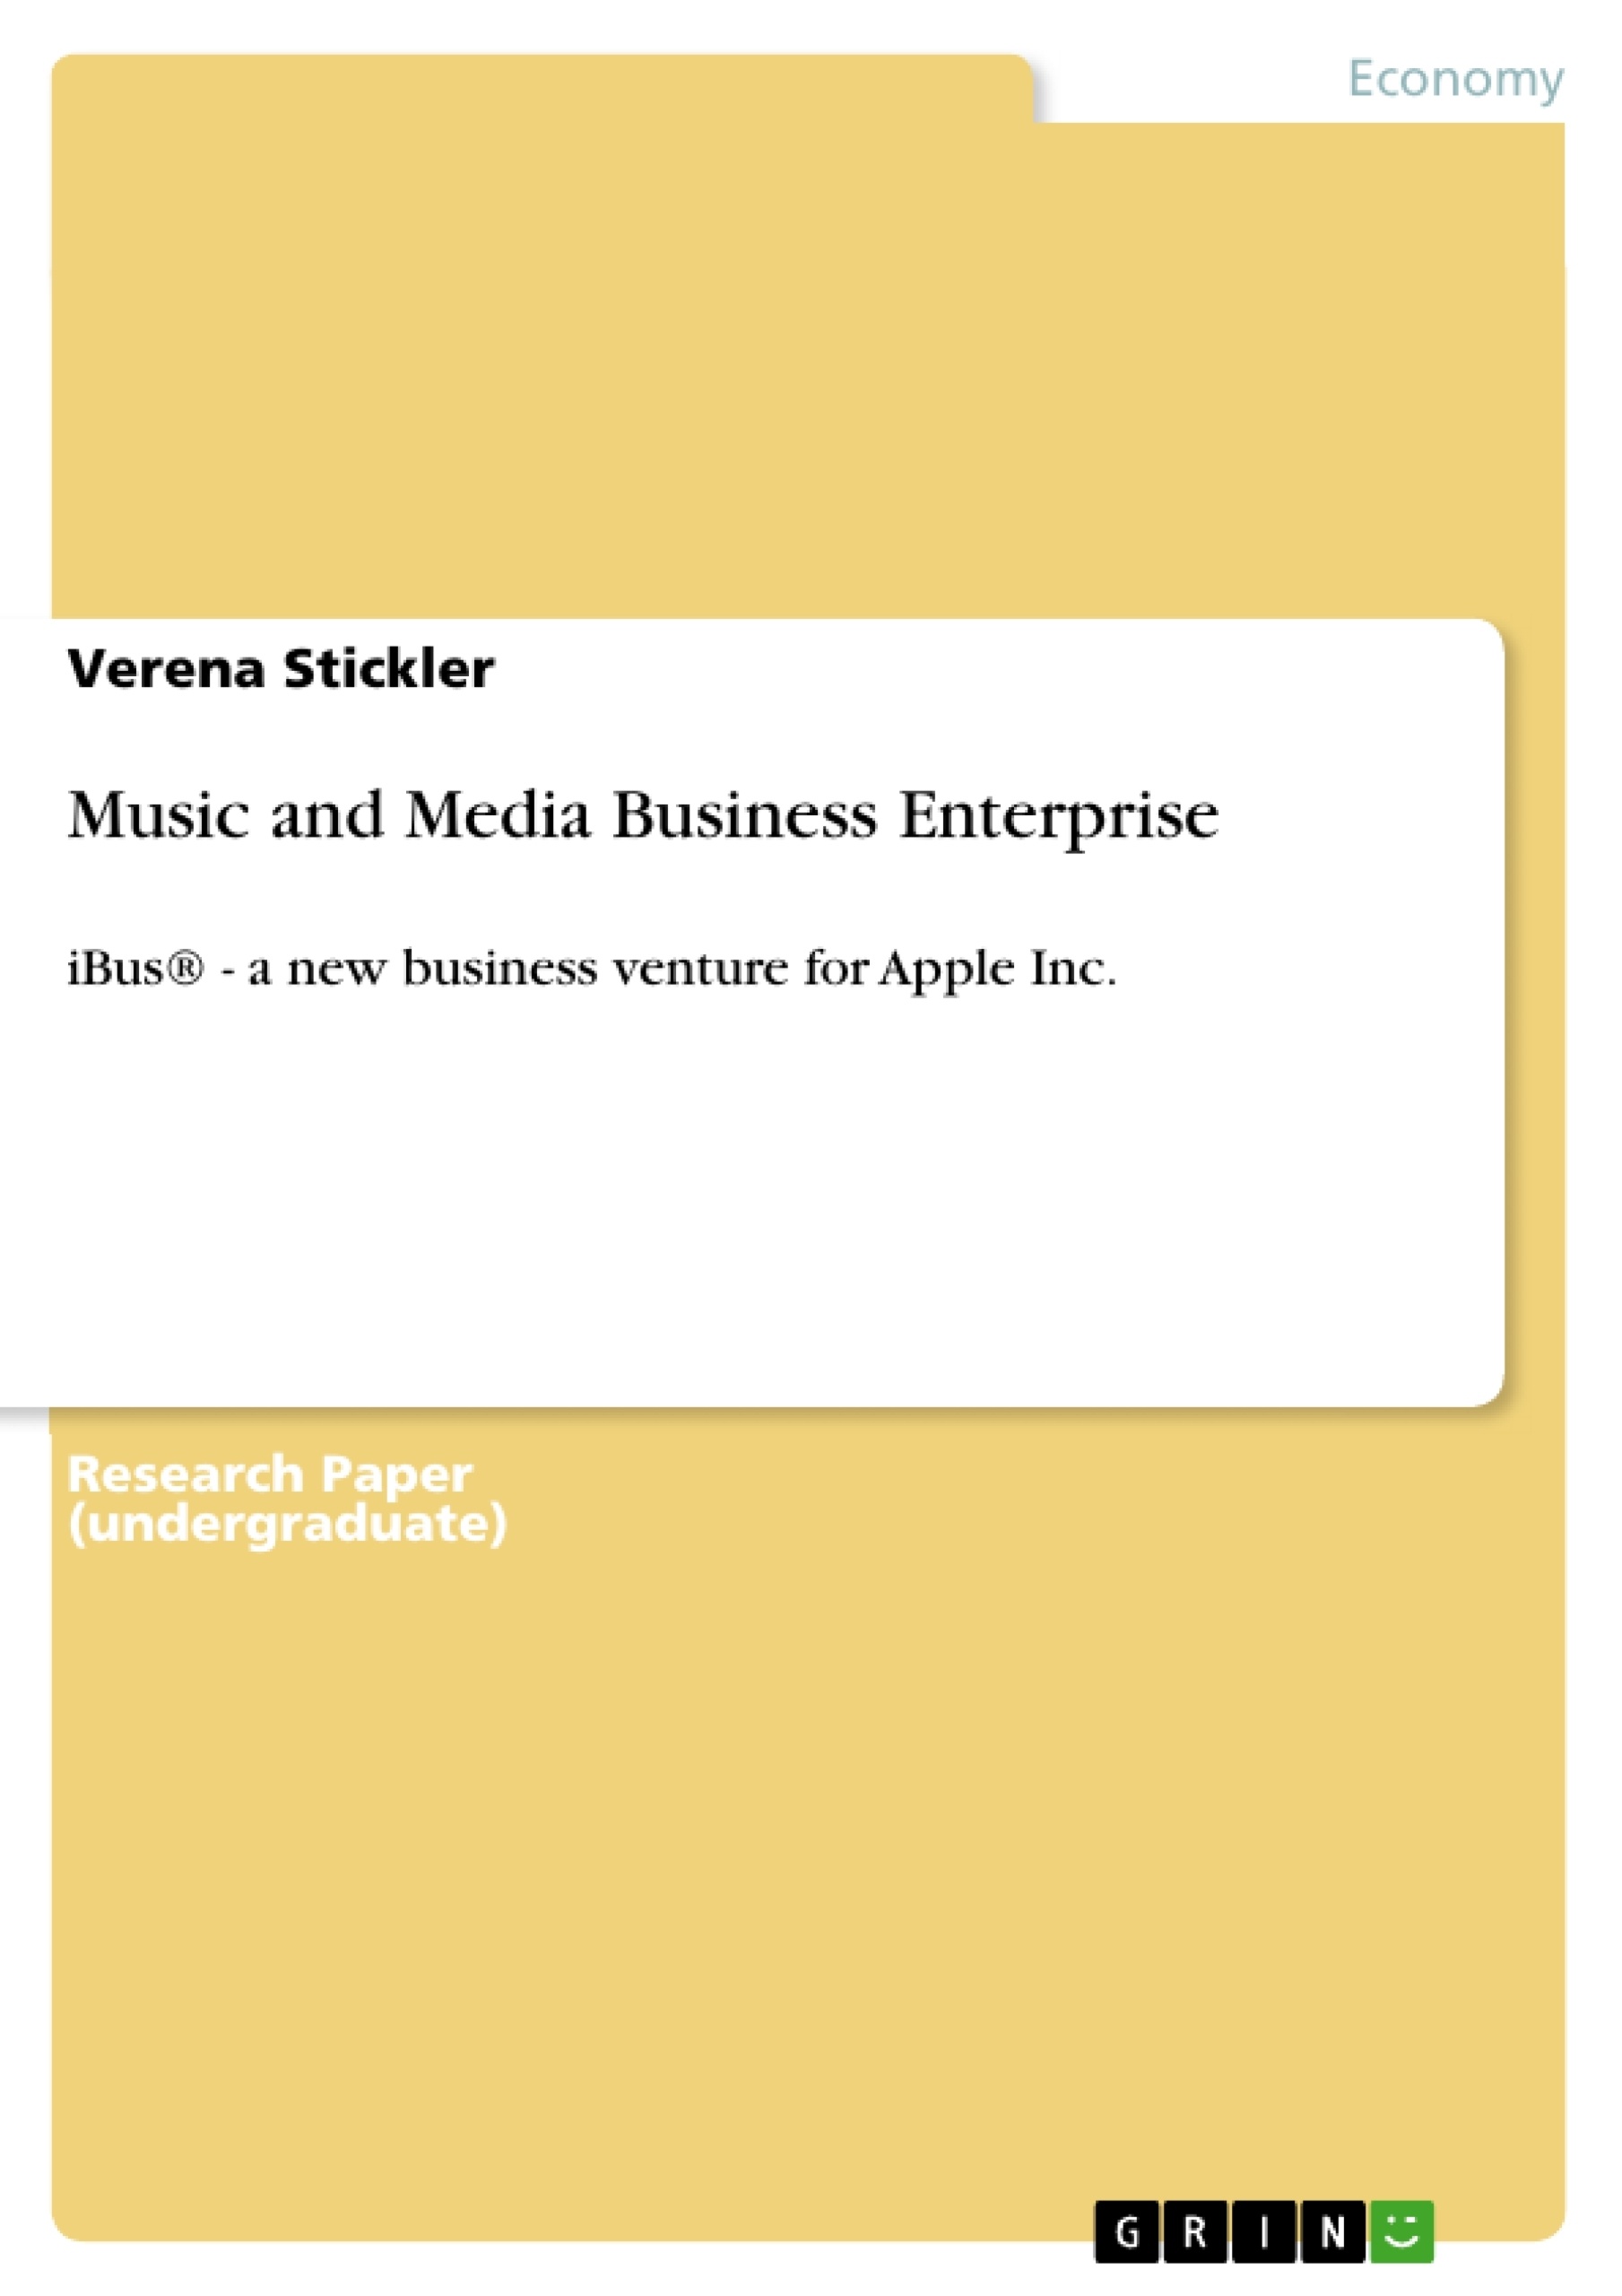 Title: Music and Media Business Enterprise